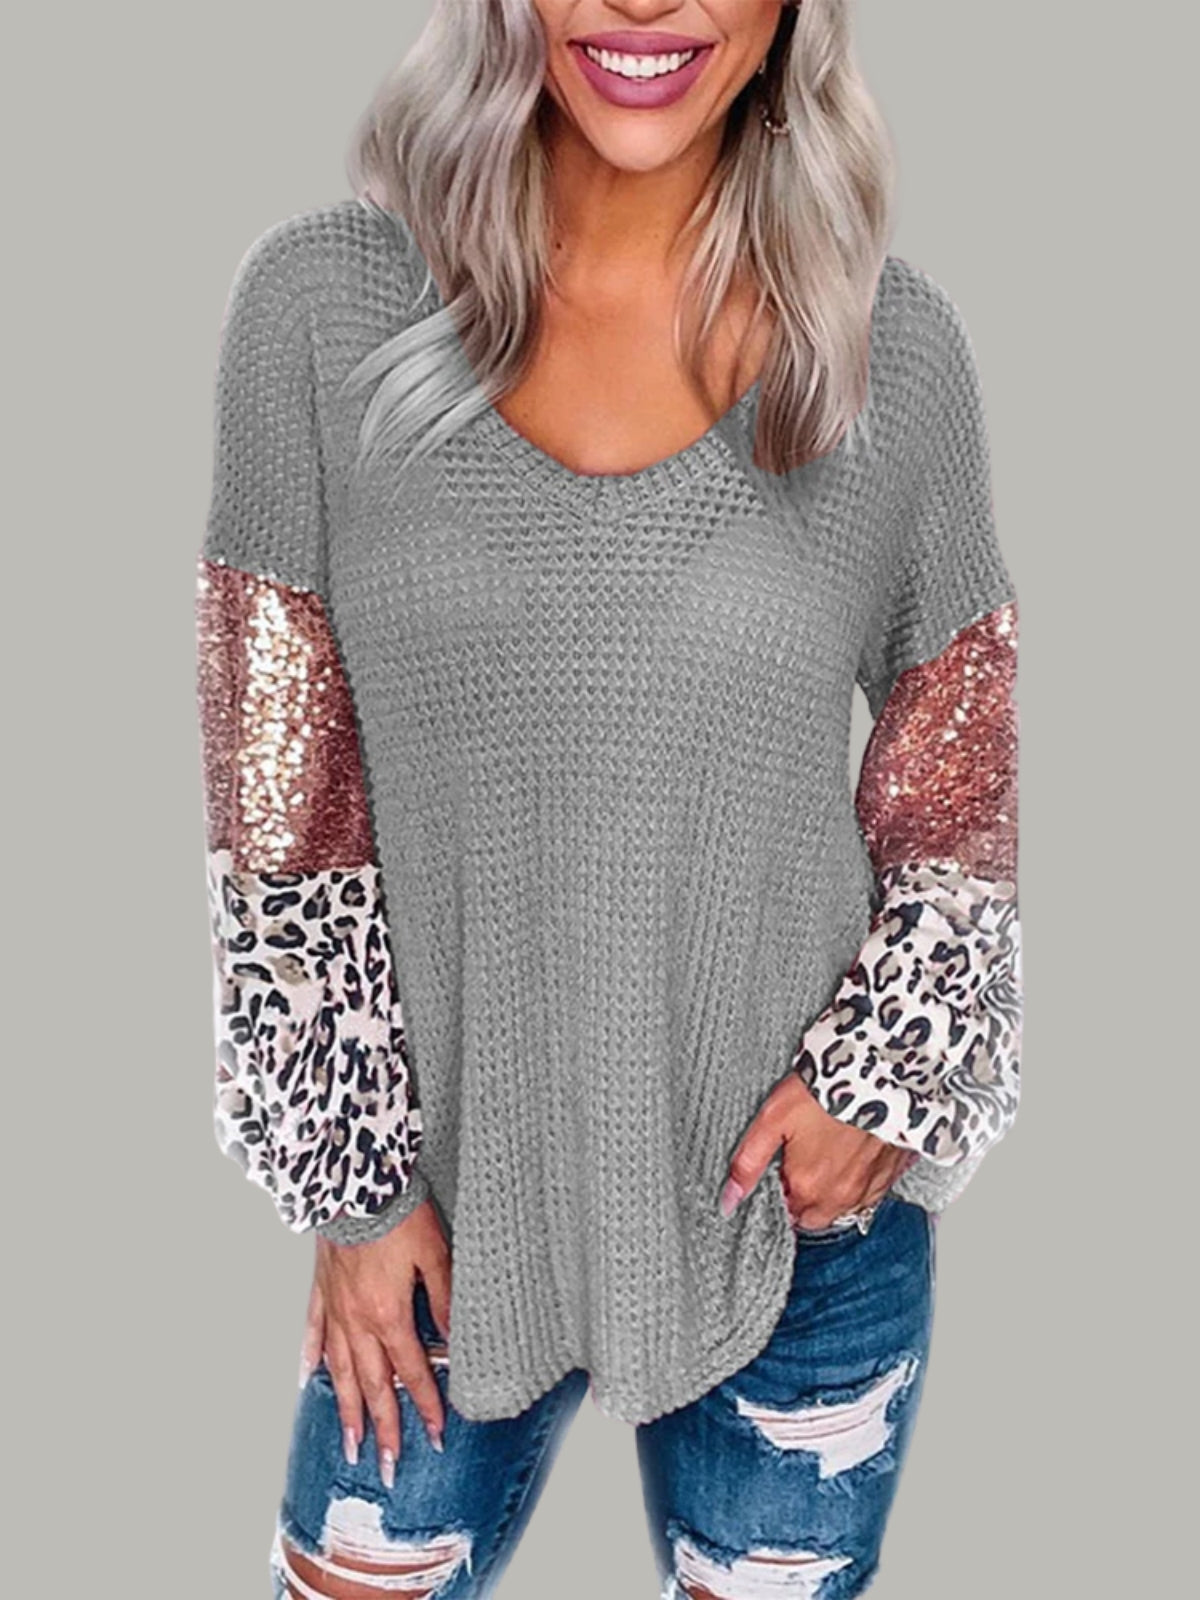 Women's Sequin and Leopard Long-Sleeved Top